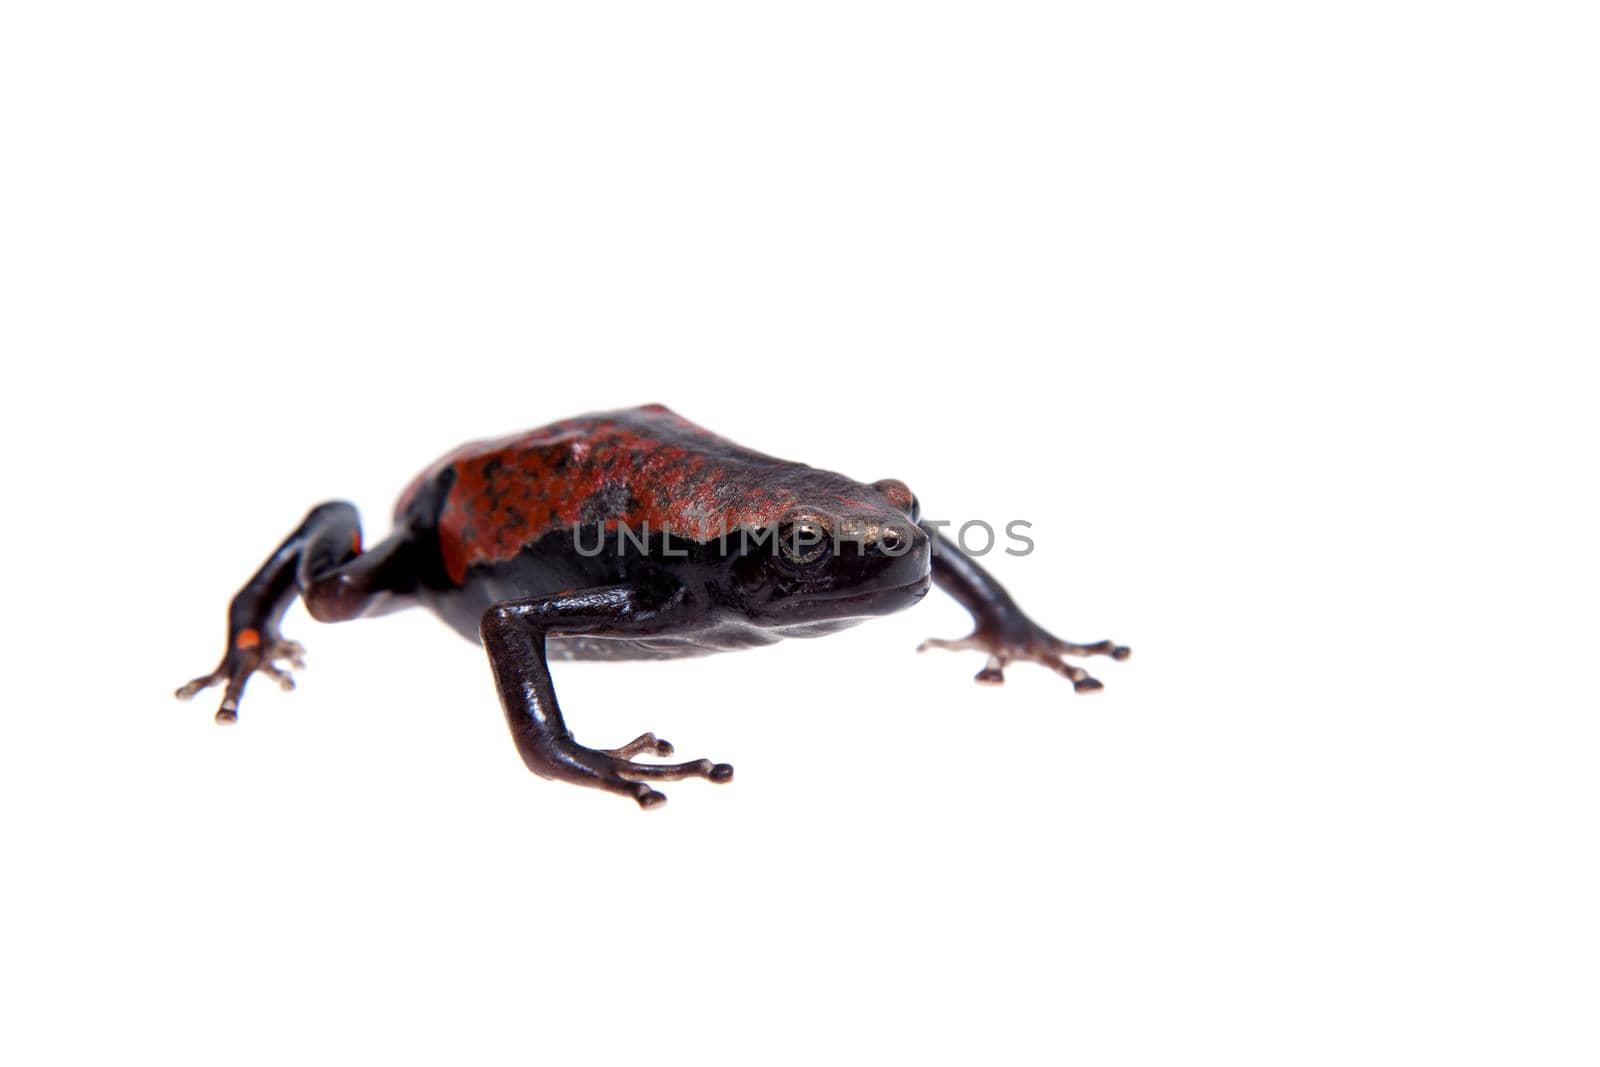 Accra snake-necked frog, Phrynomantis microps, red rubber frog or West African rubber frog isolated on white background